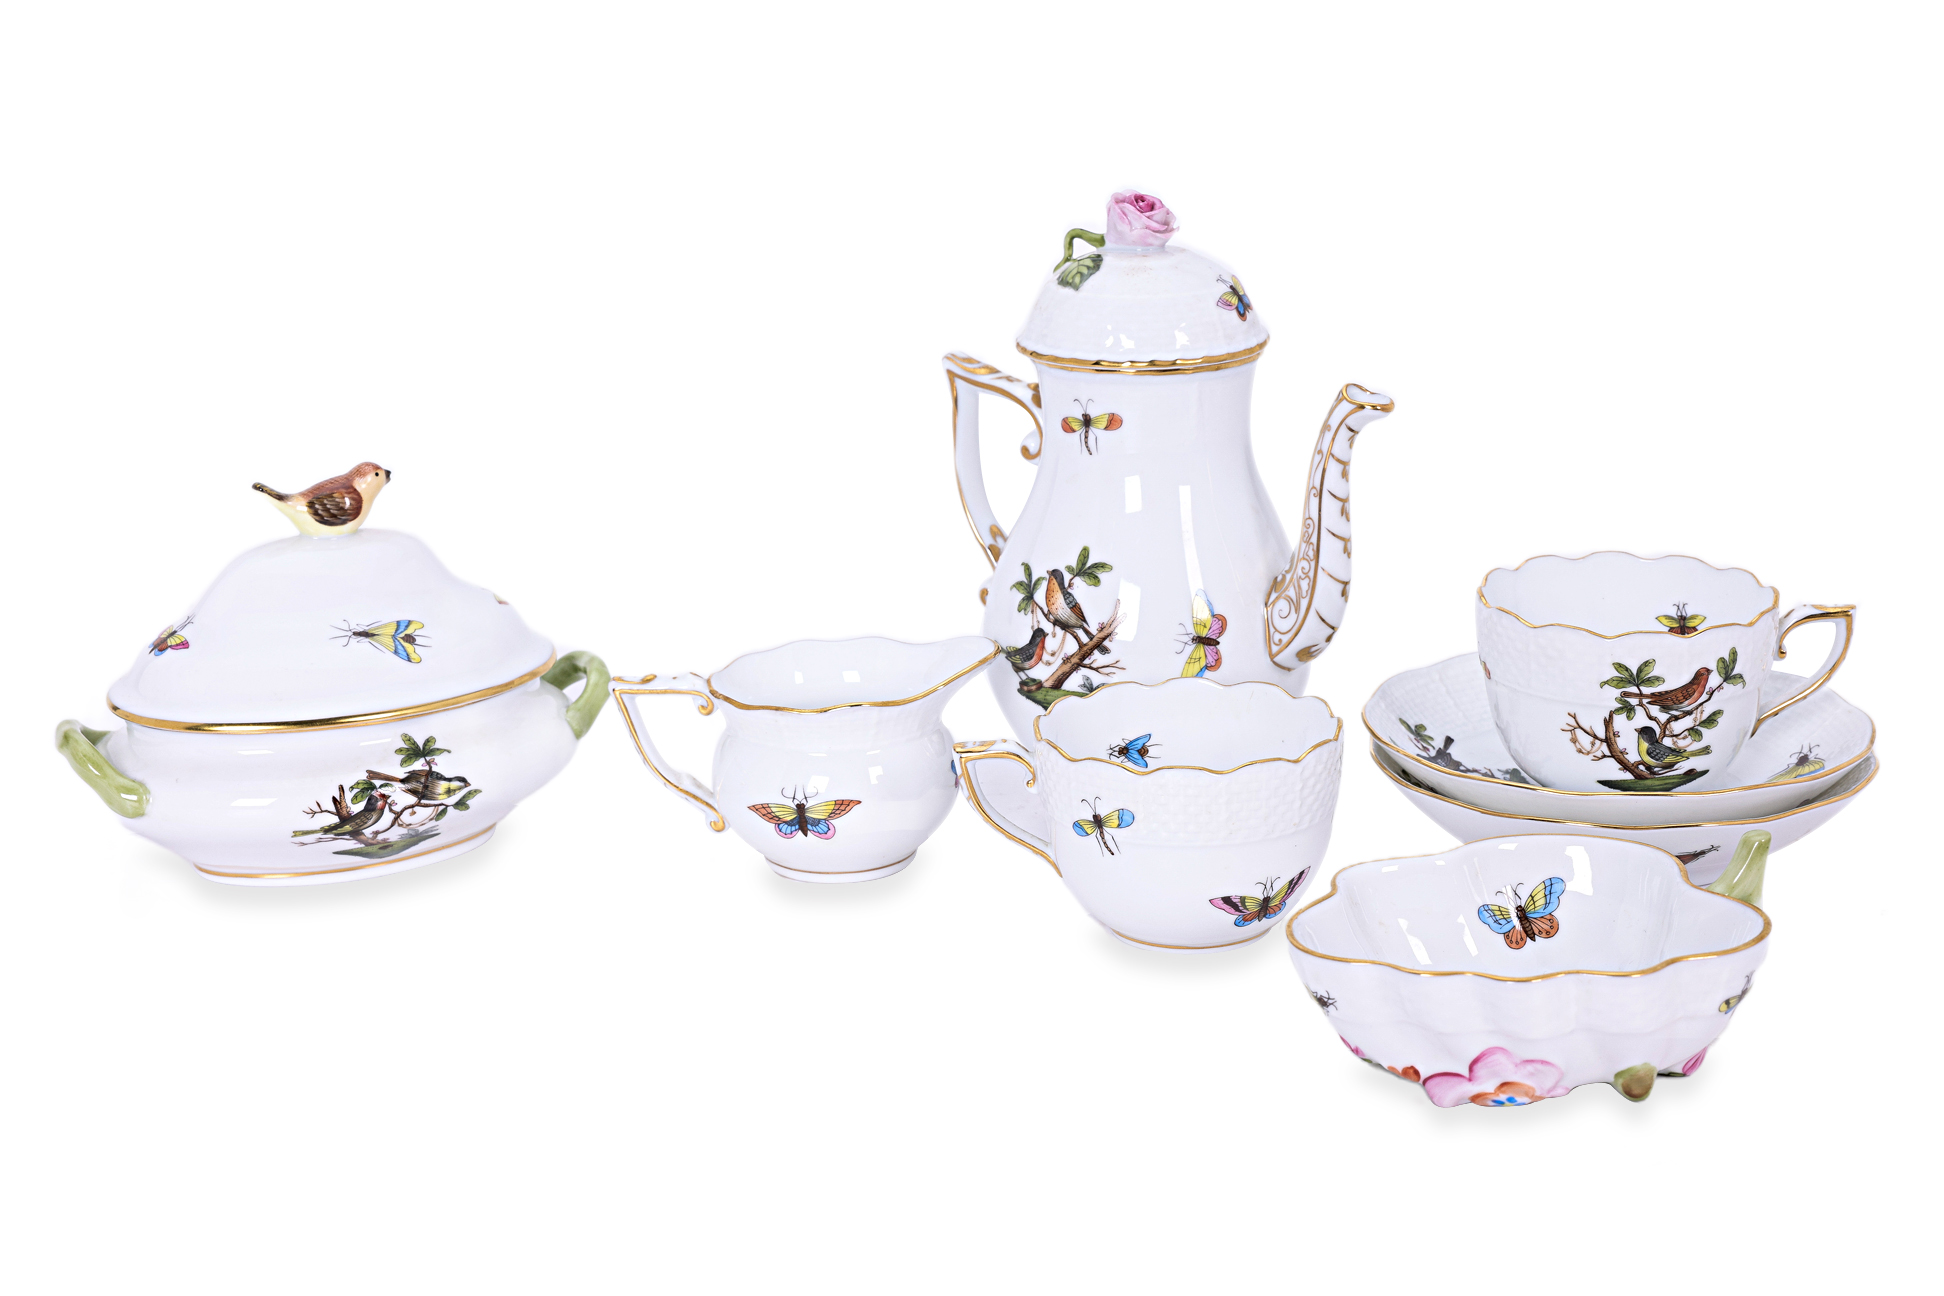 A HEREND ROTHSCHILD BIRDS TETE A TETE COFFEE SERVICE - Image 3 of 3